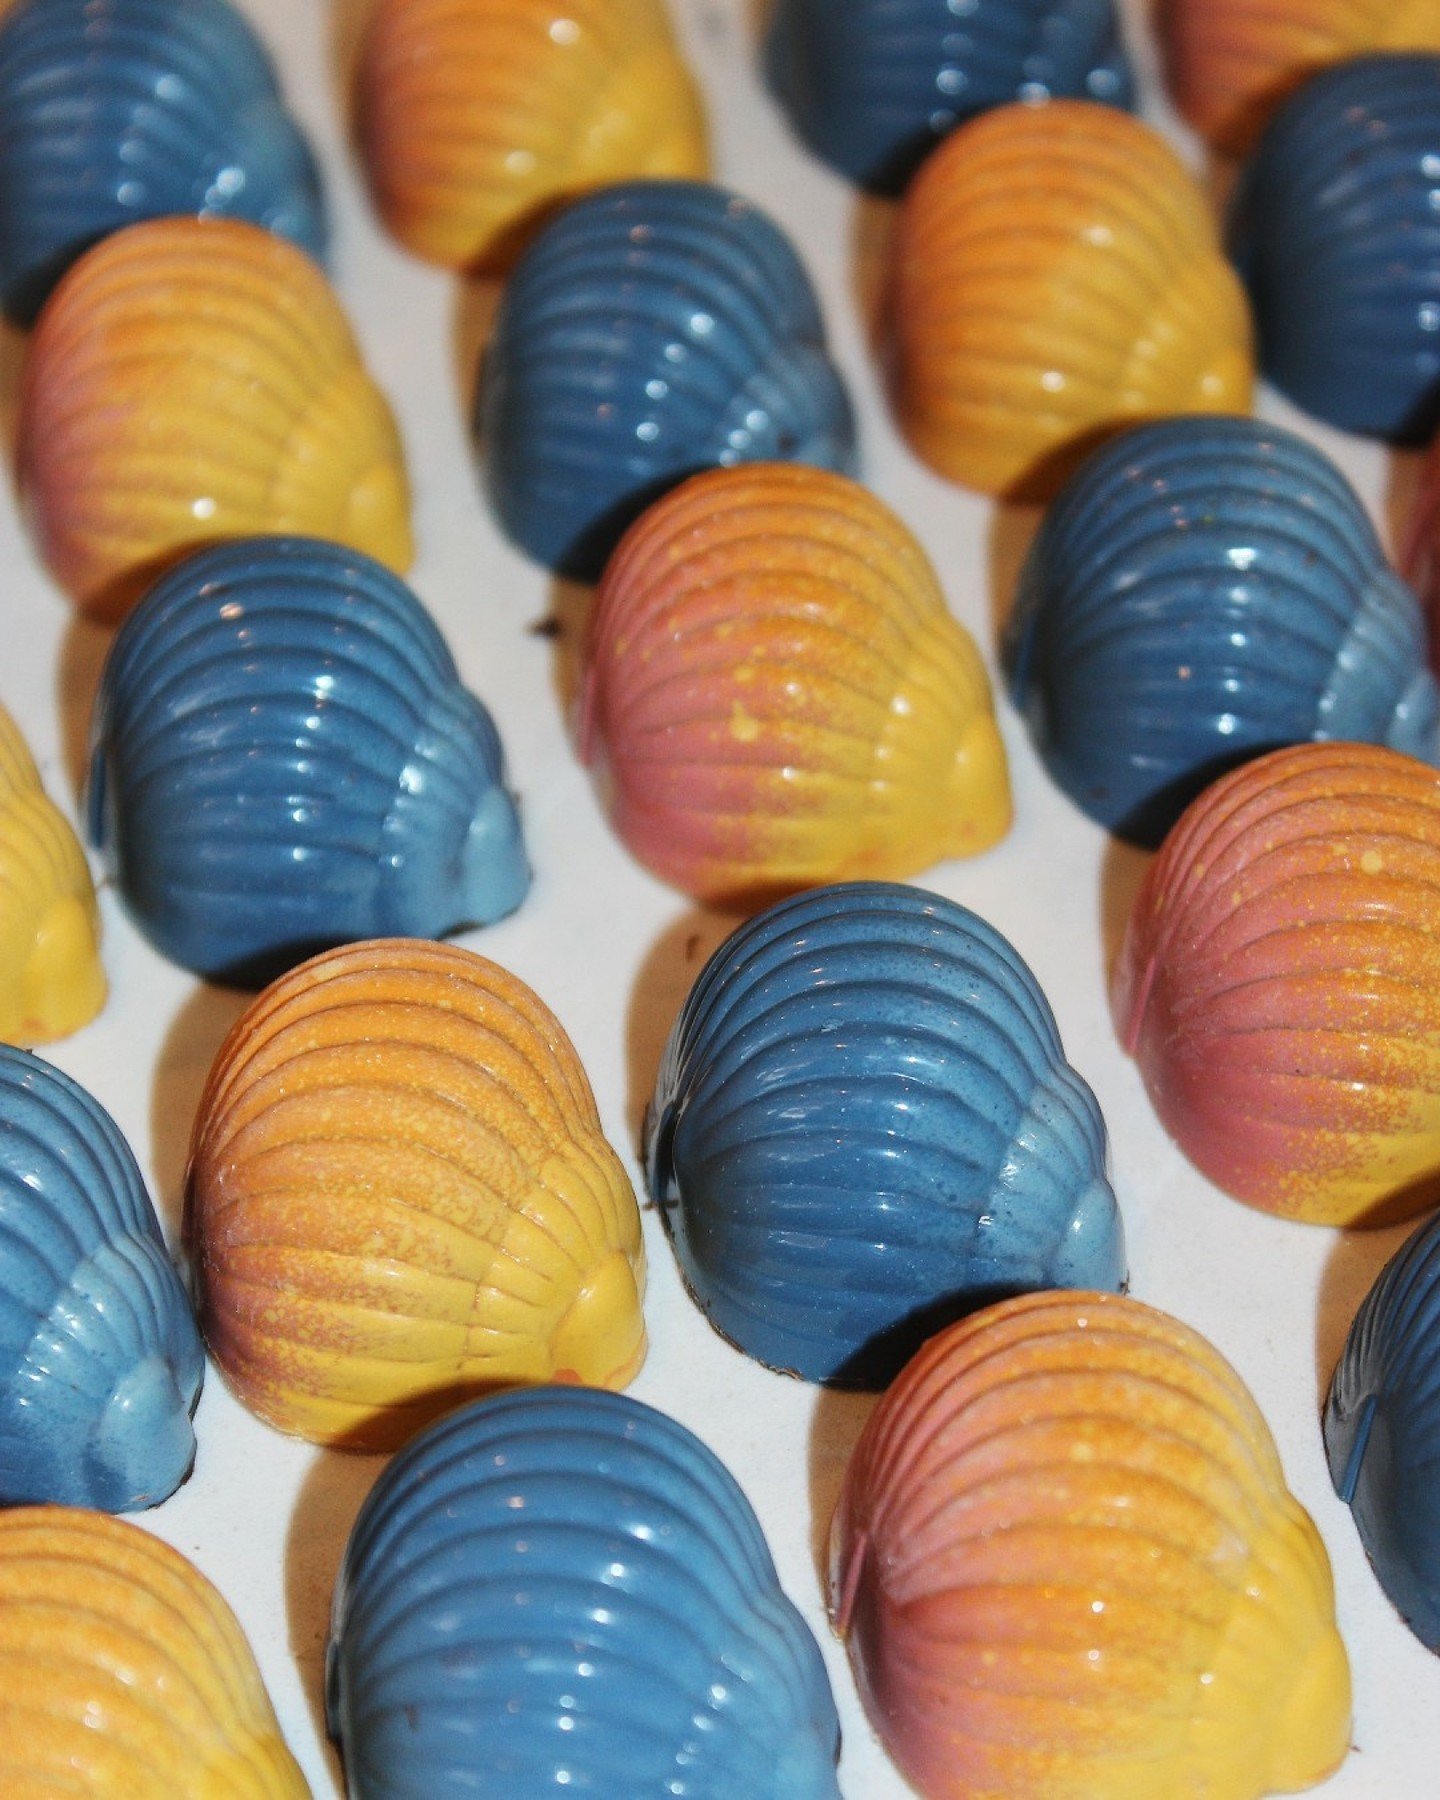 Dreaming about summer beach days with our Summer Peach and Salted Caramel bonbons! 💭 

*
*
*
*
*
#sweets #adamtyoungconfections #siftmystic #pastrychef #bonbons #bonbon #atyconfections #chocolatebonbons #chocolatier #handcrafted #artisanchocolate #g